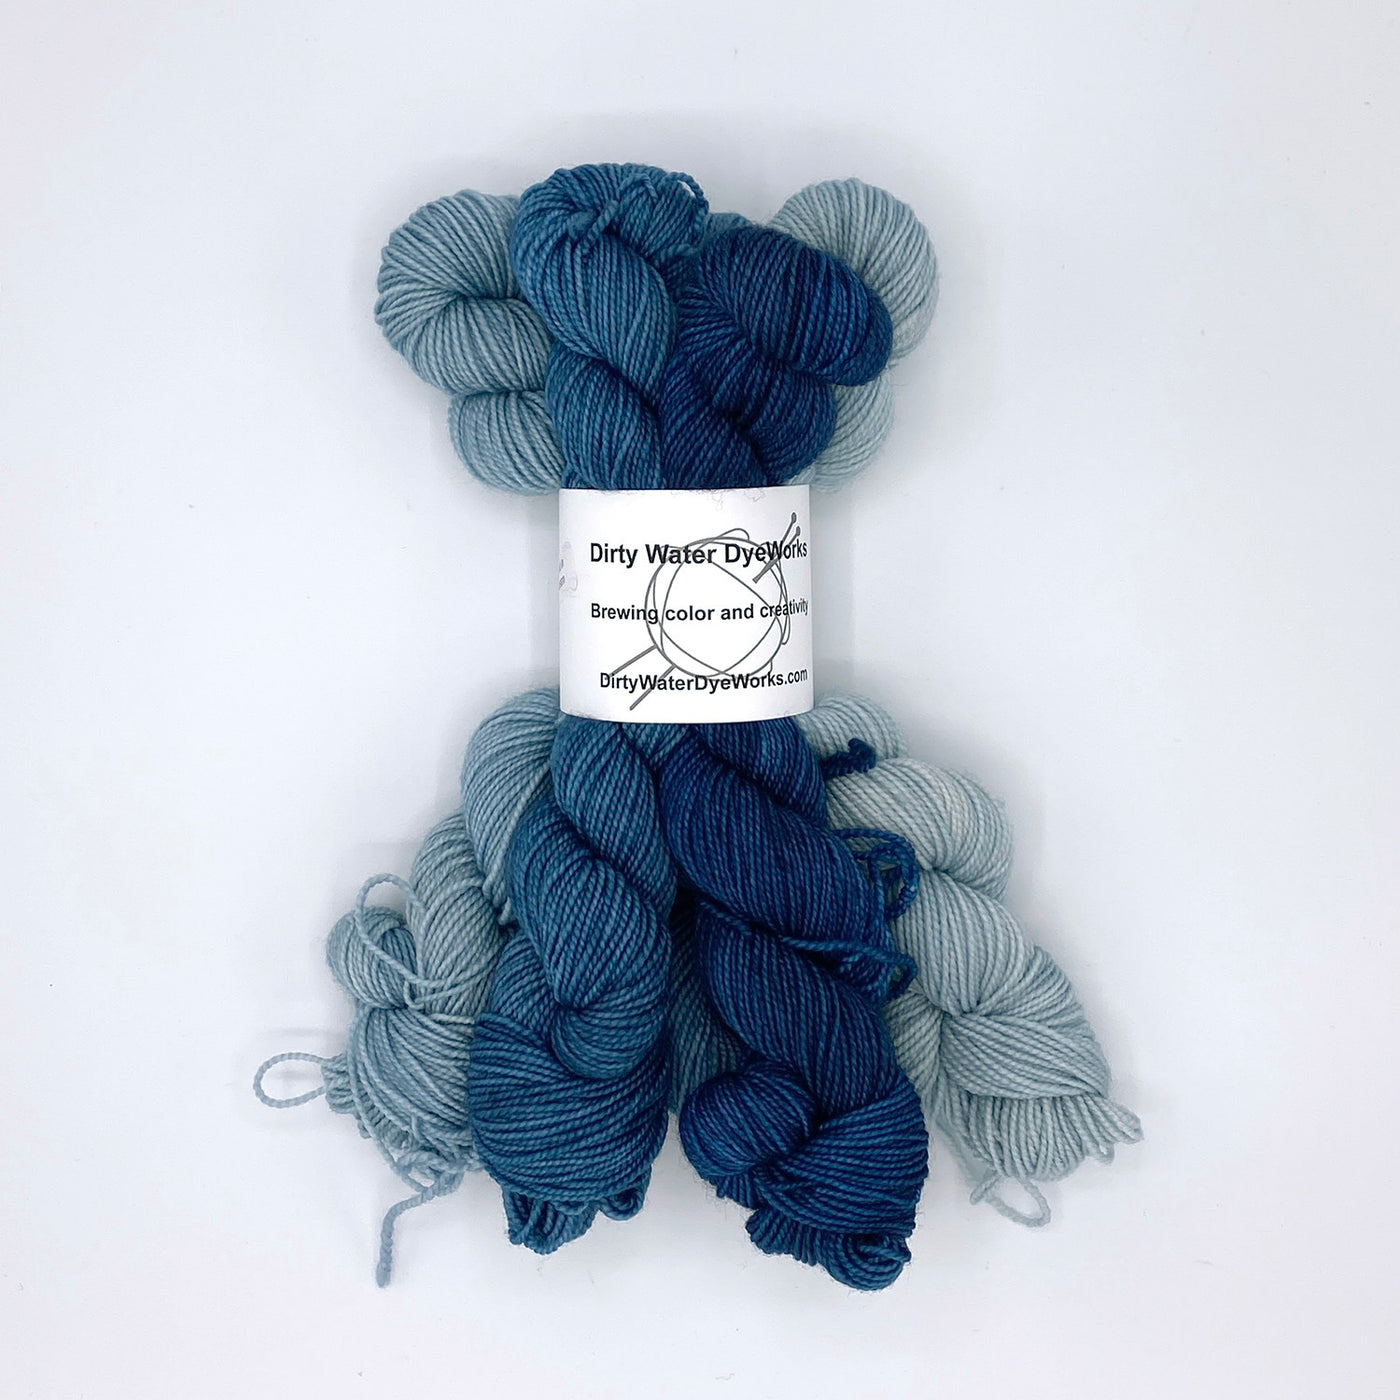 Lillian Gradient Bundle by Dirty Water DyeWorks in Drizzle